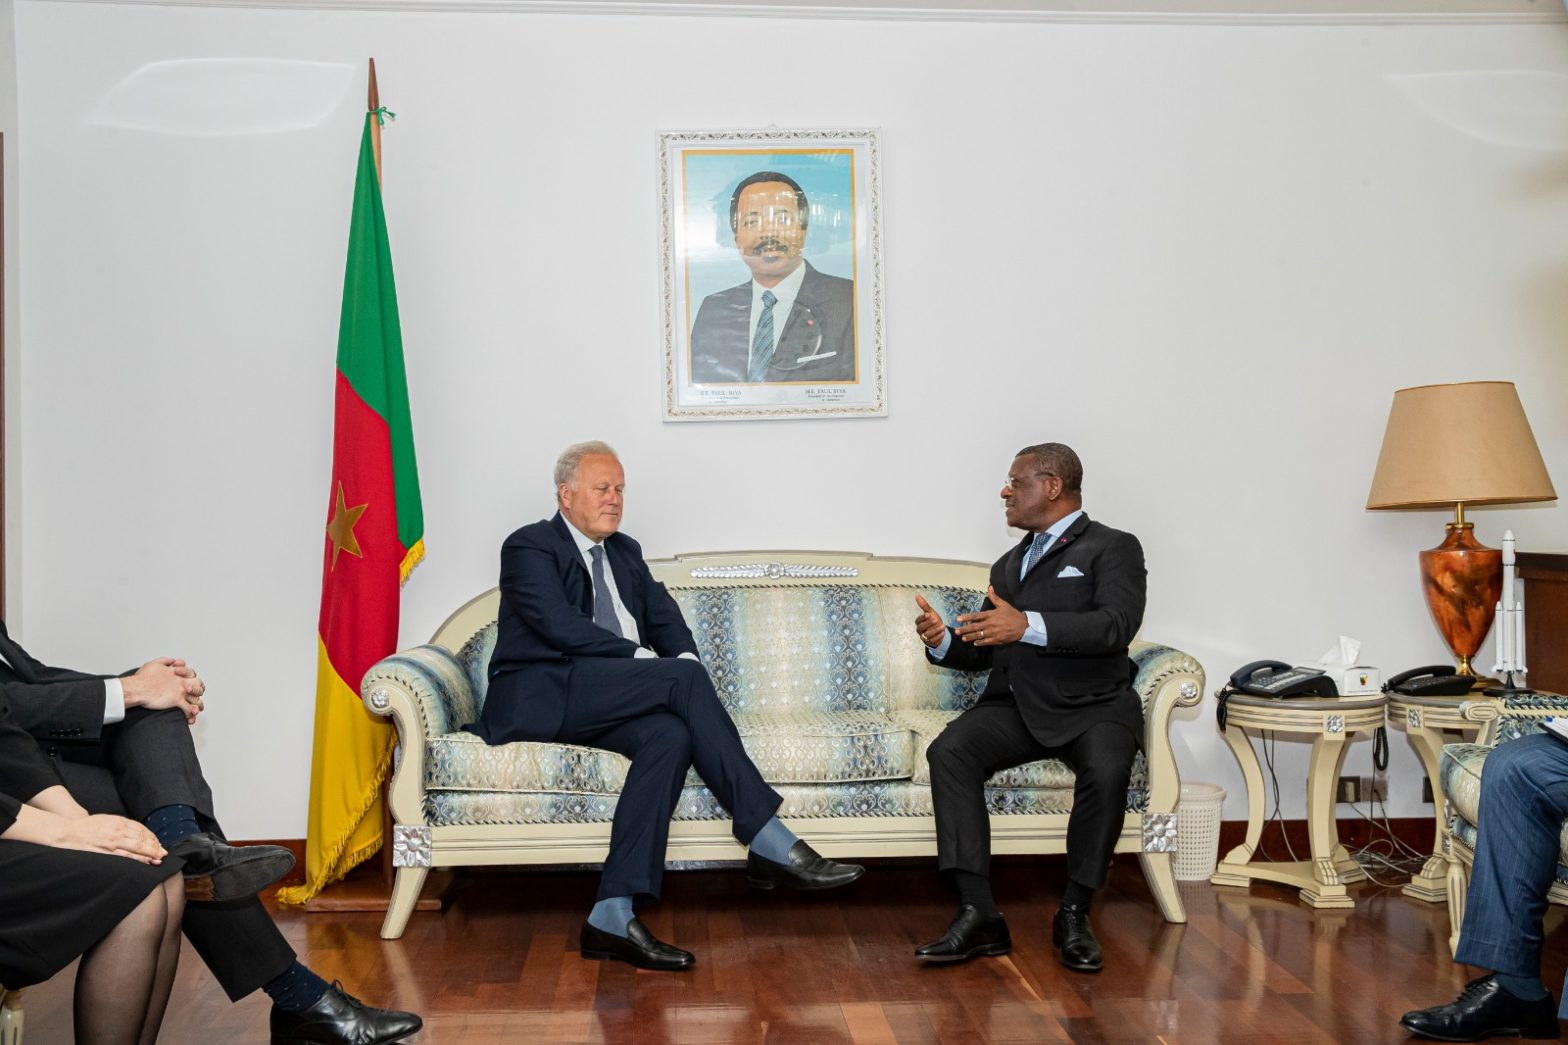 Lord Marland calls upon the Prime Minister of Cameroon